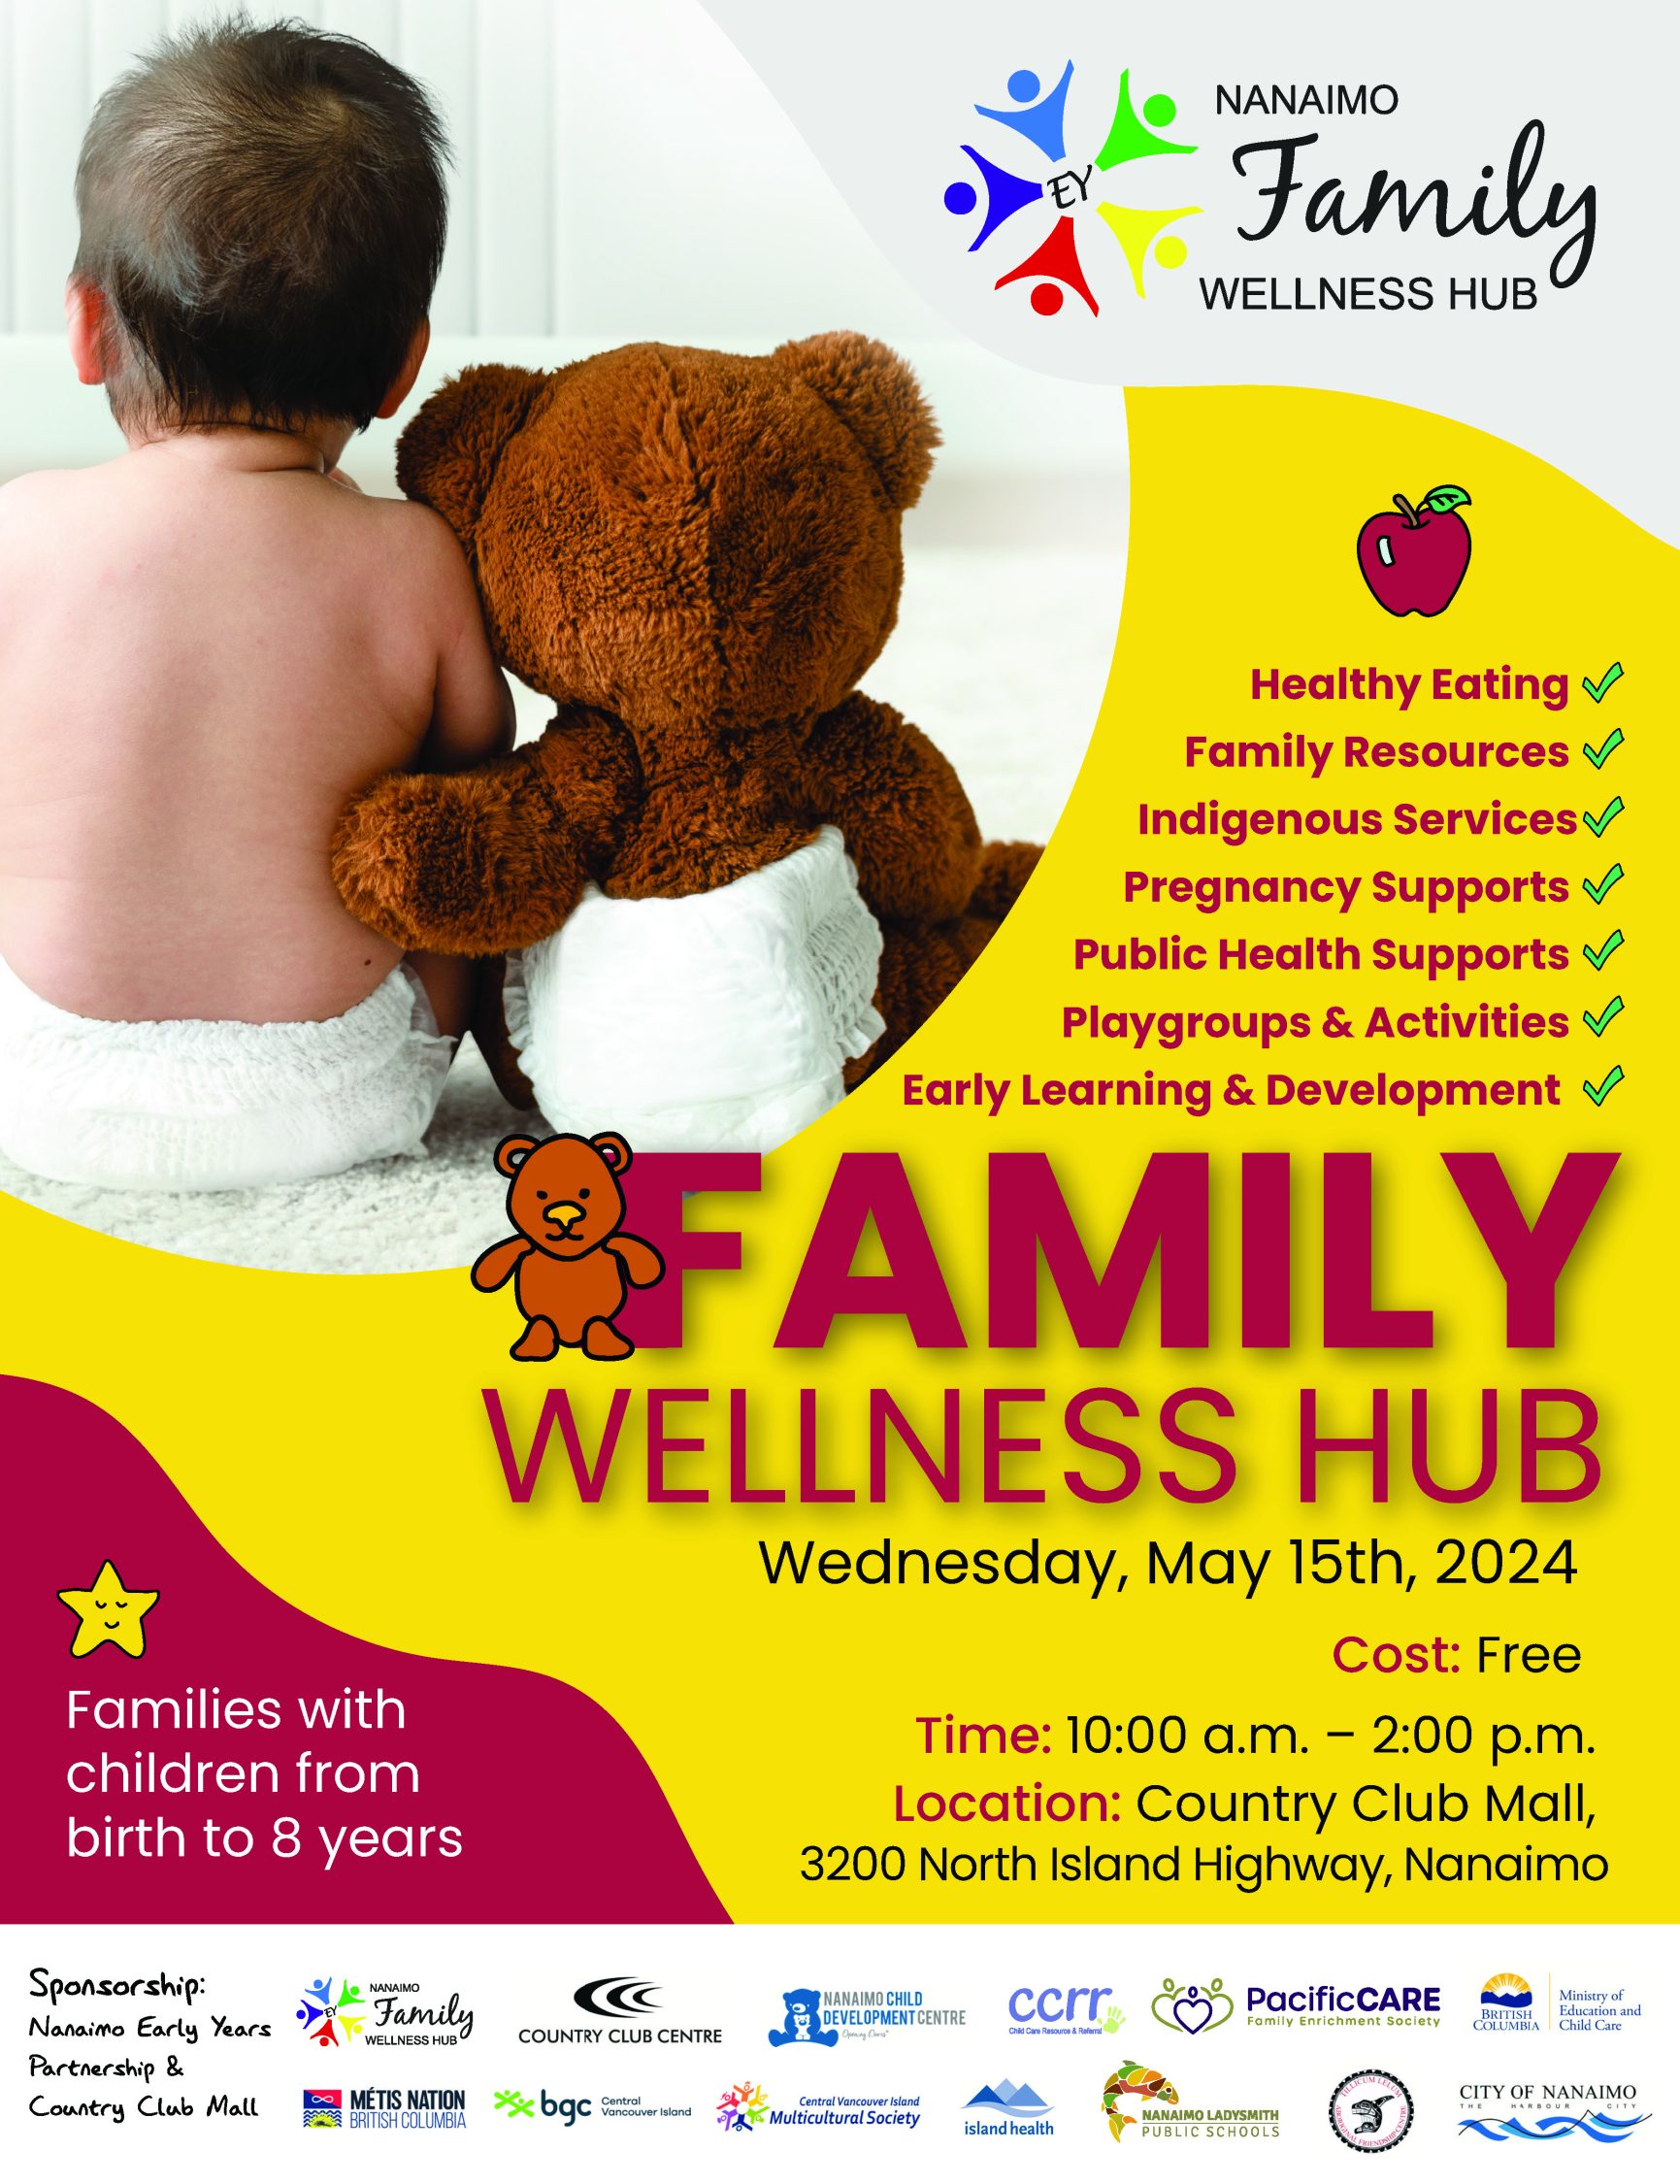 "Nanaimo Family Wellness Hub - Wednesday, May 15th, 2024"
Image of a baby in a diaper, sat up and facing away from the camera with a teddy bear in a diaper facing the same direction. "Cost: Free, Time: 10:00AM - 2:00PM, Location: Country Club Mall, 3200 North Island Highway, Nanaimo. Families with children from birth to 8 years"